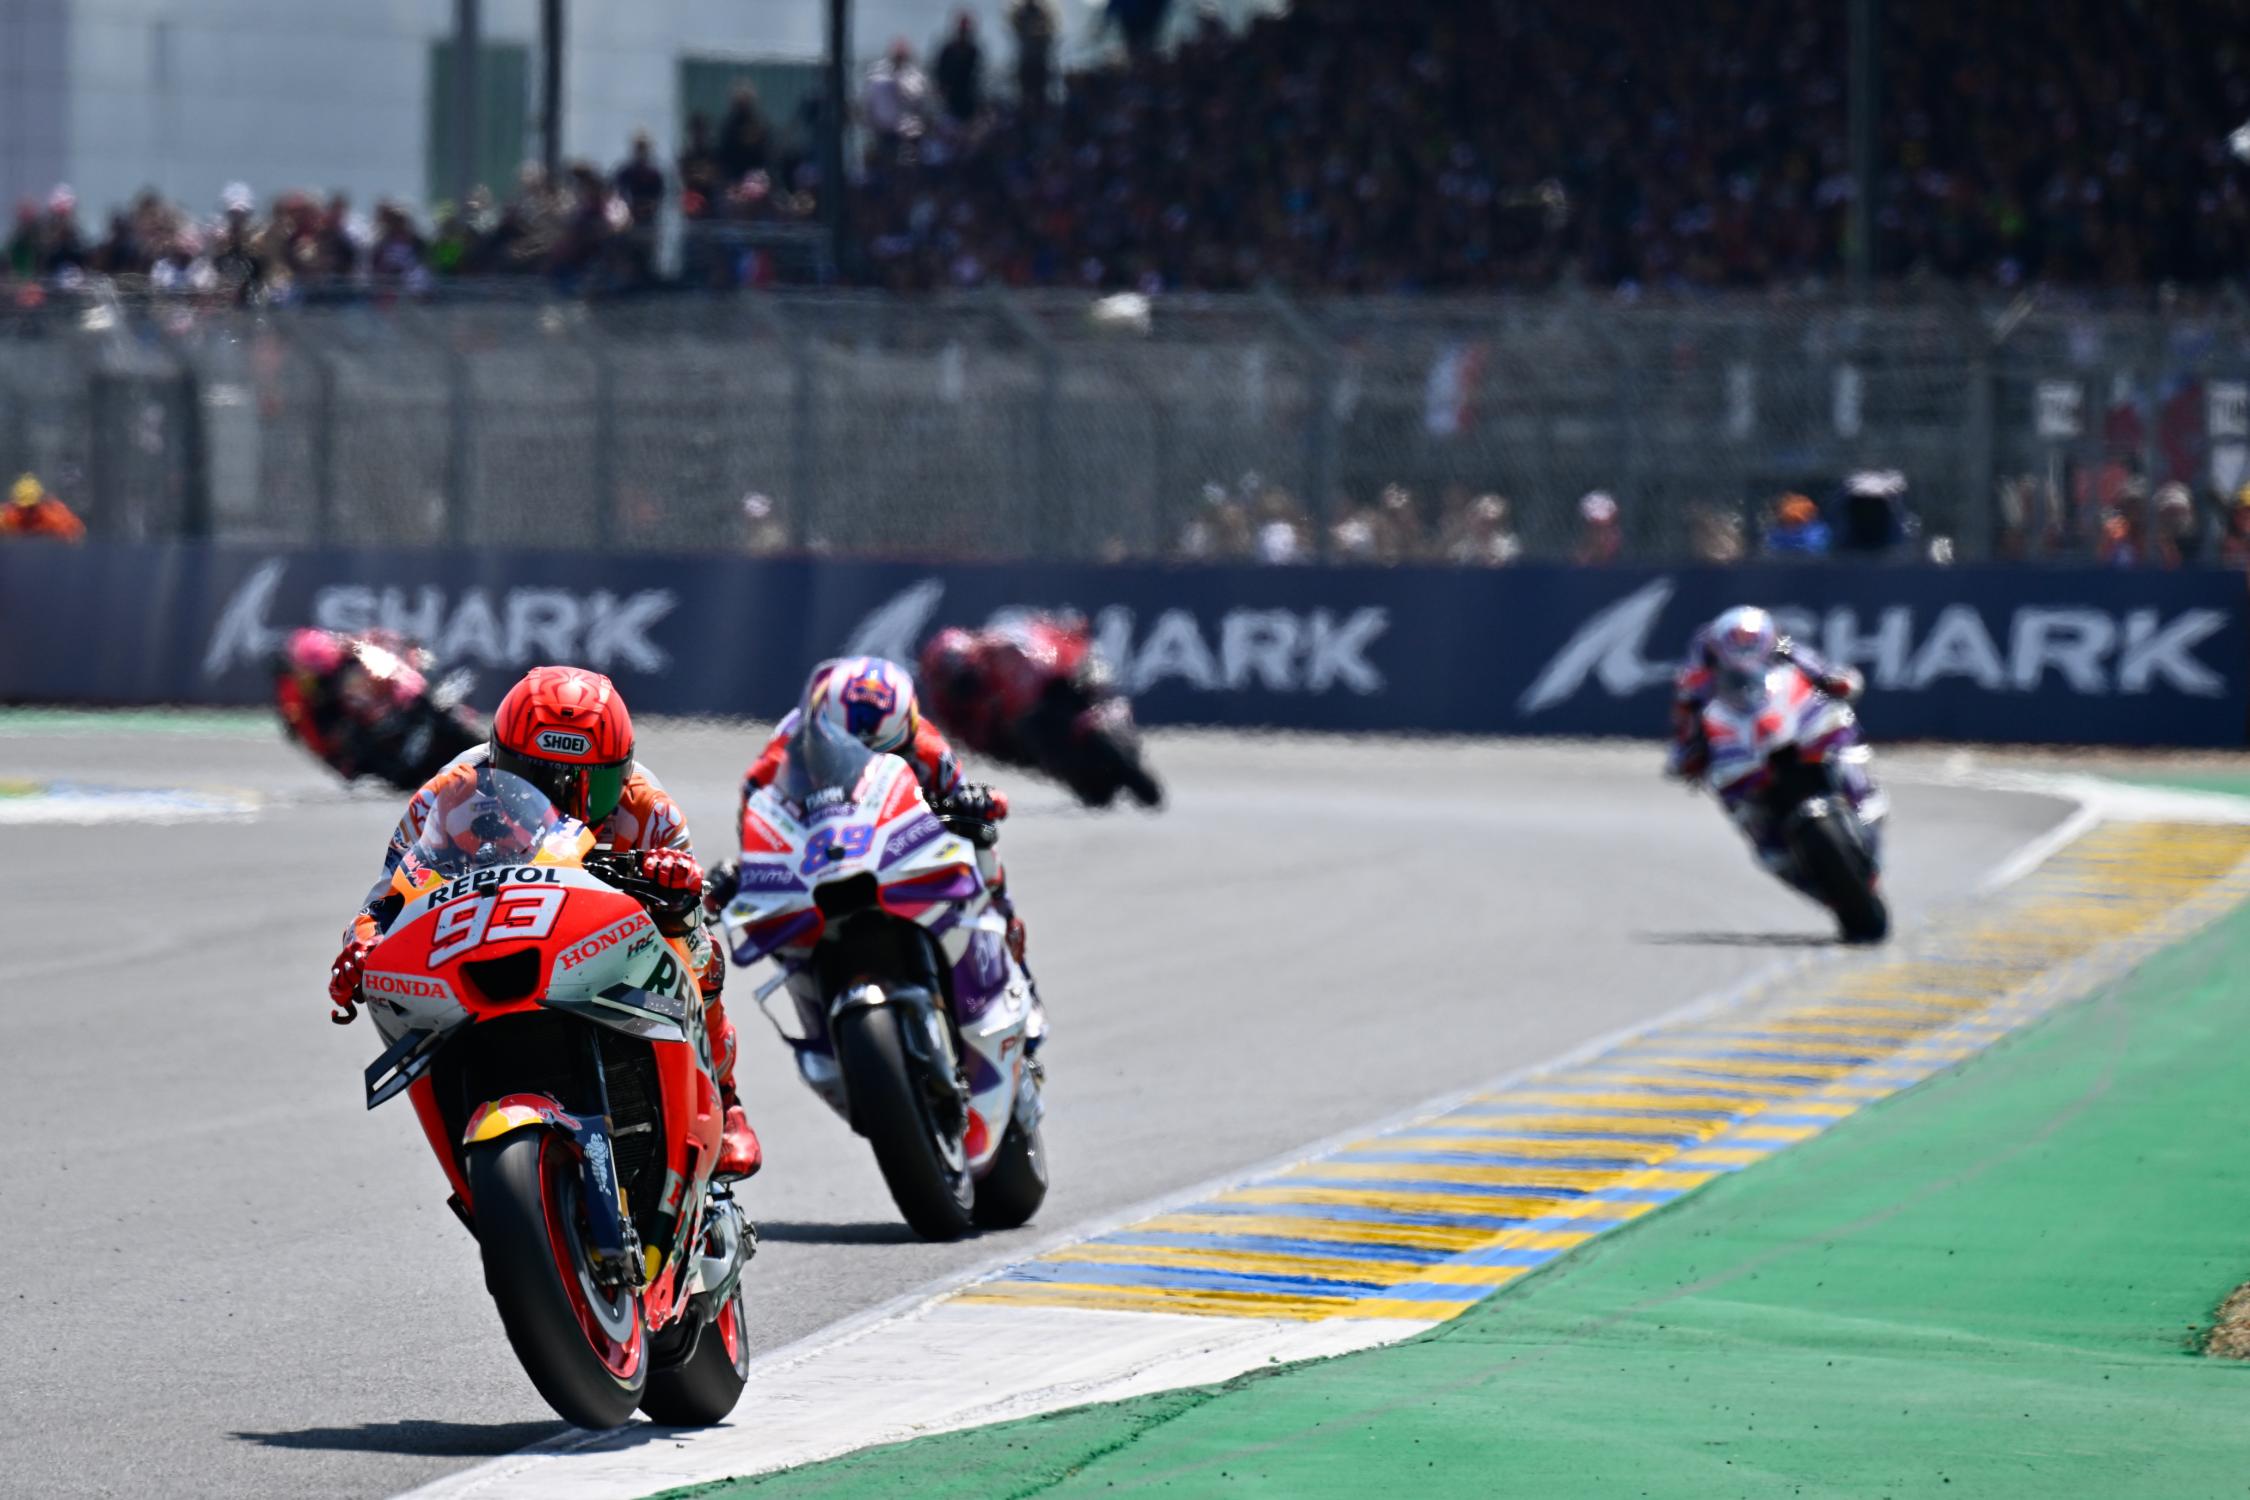 Marc Marquez: I prefer to fall fighting for the podium